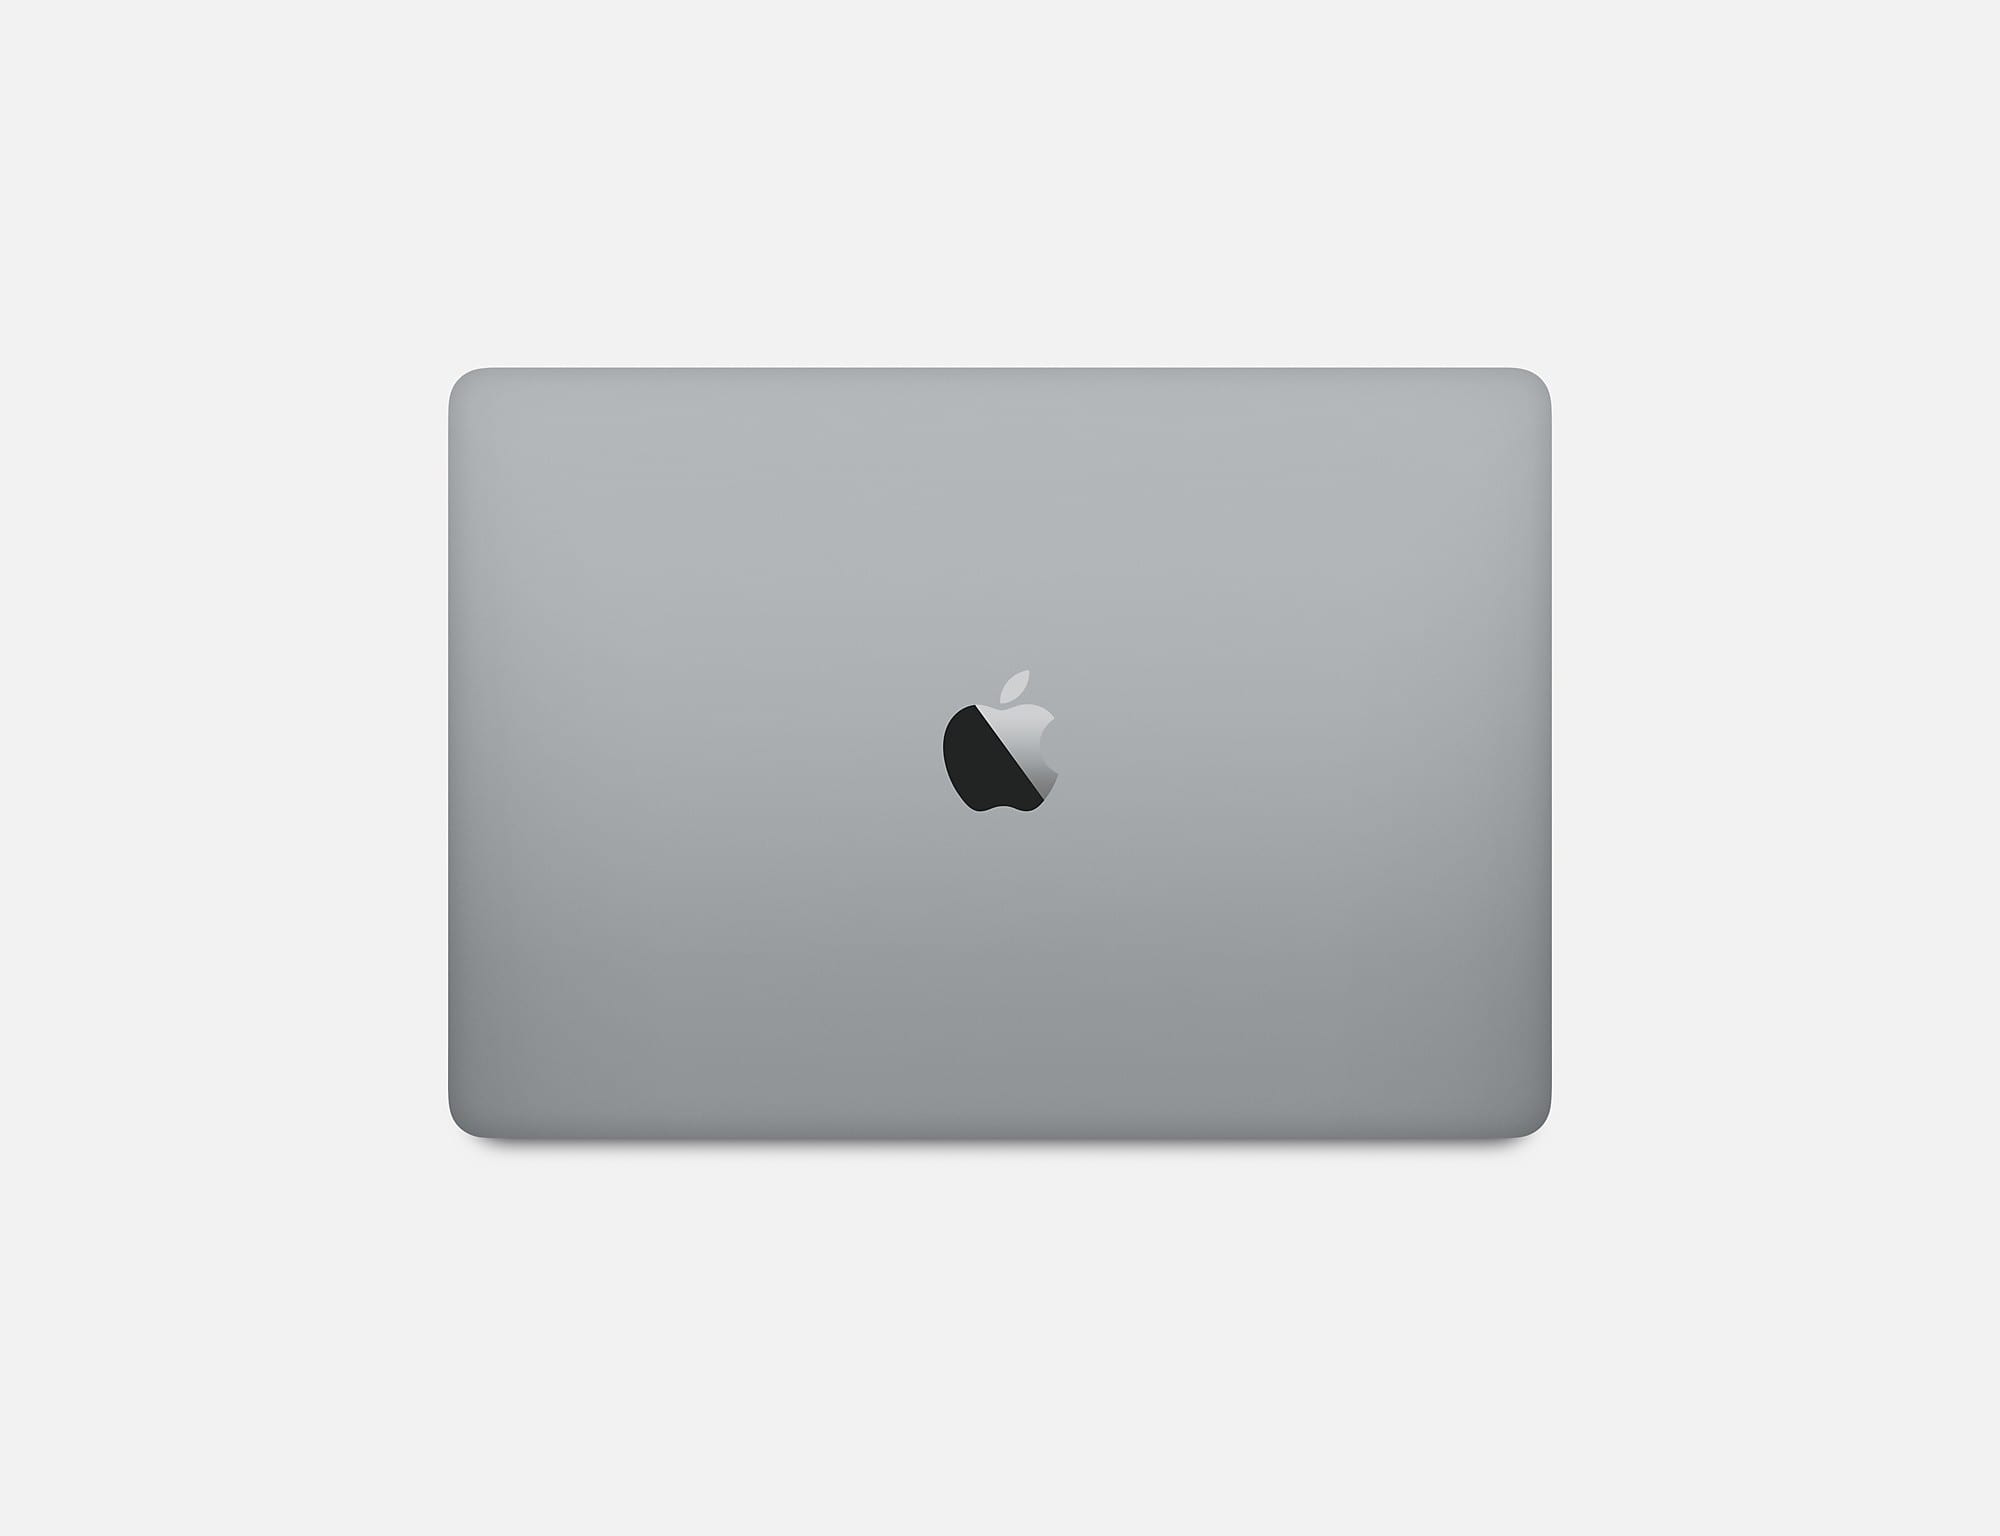 mbp13touch space gallery4 201610